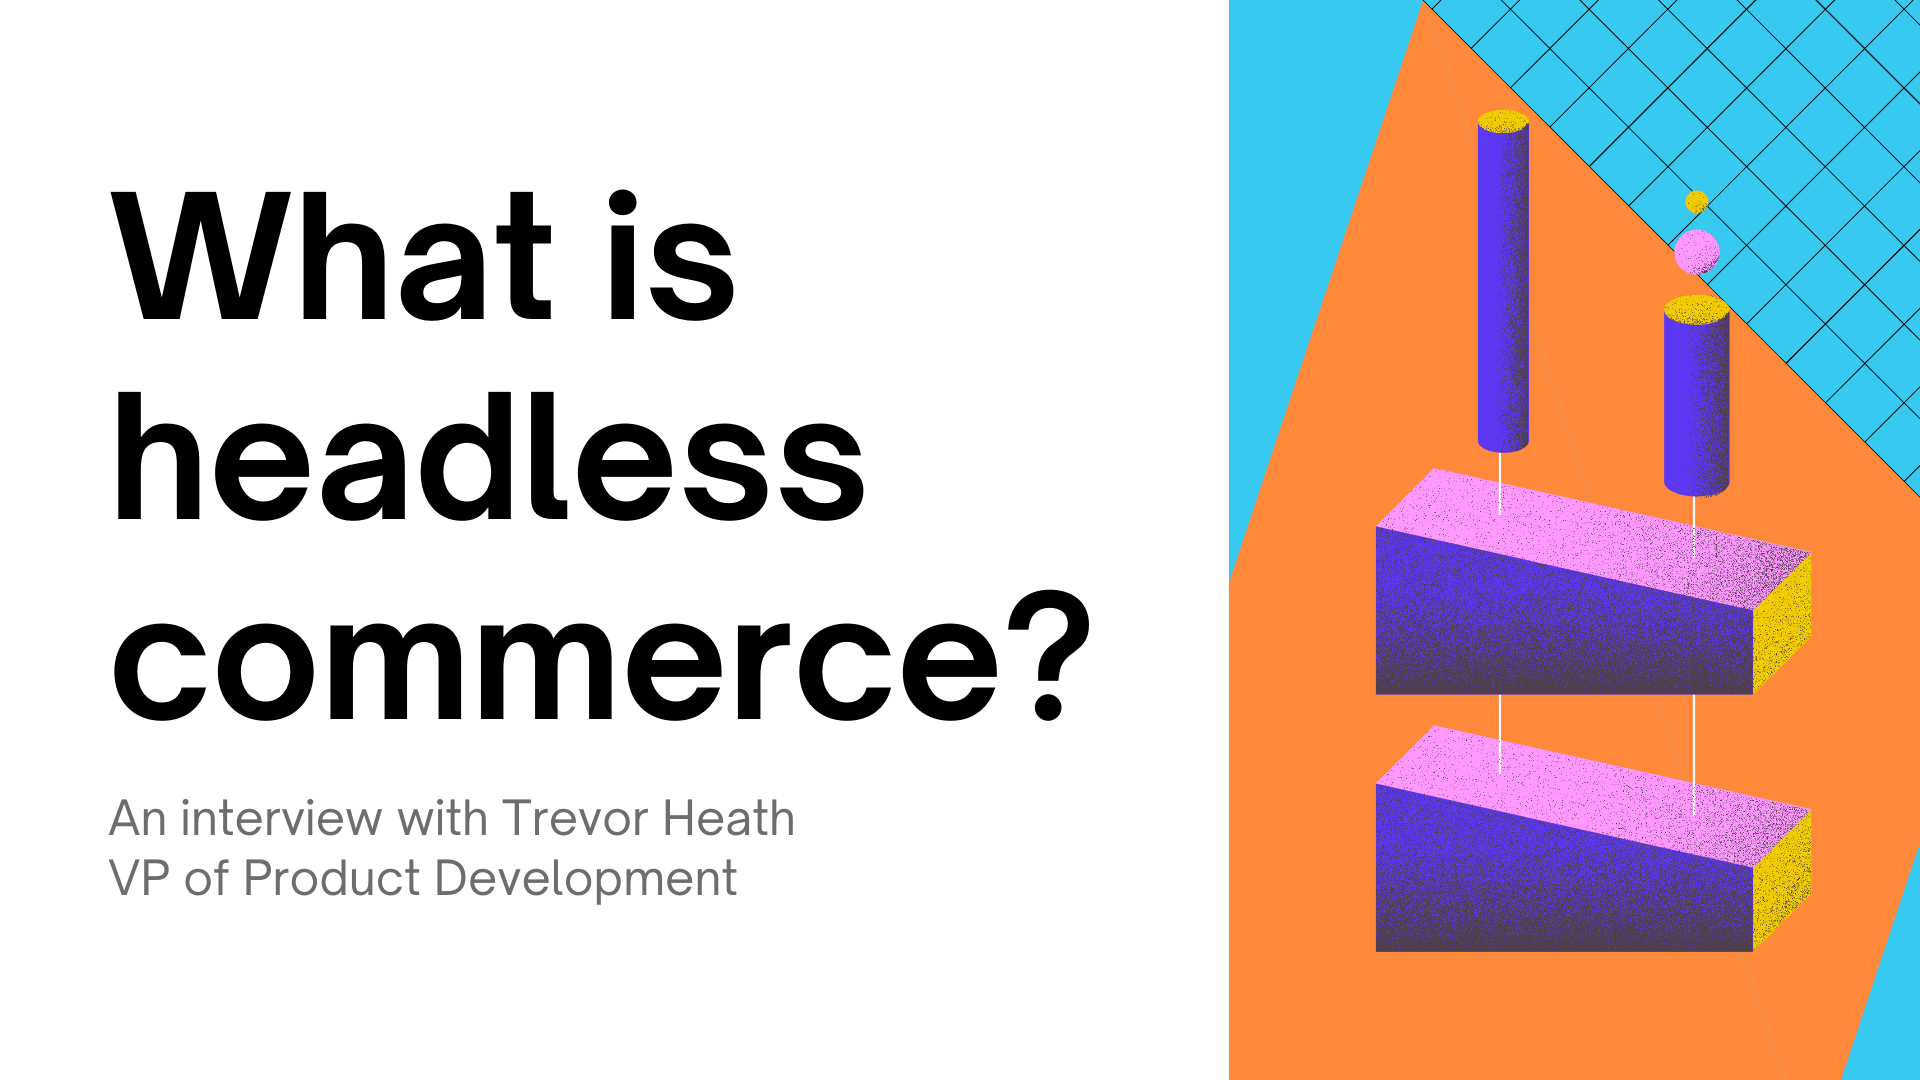 What is headless commerce?